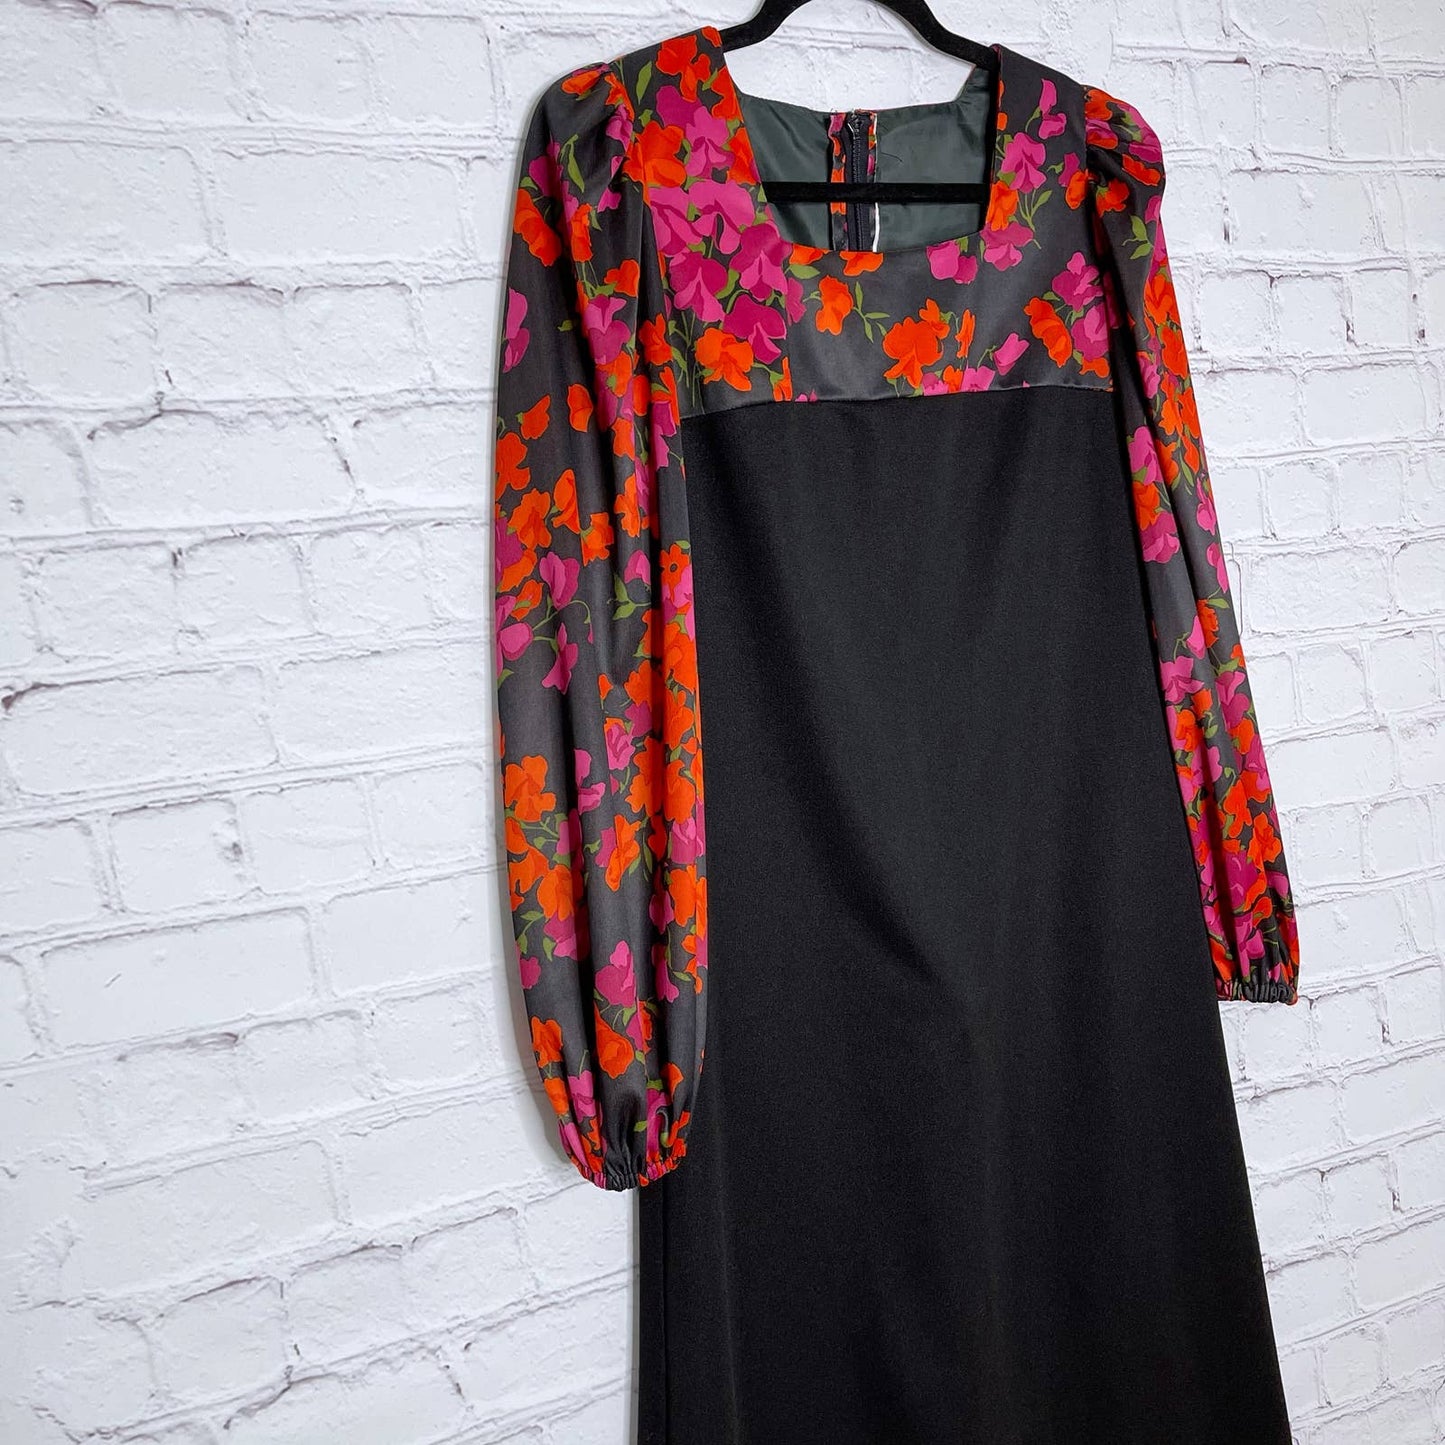 Vintage 70s Black Maxi Dress with Floral Contrast Long Sleeves Size M L